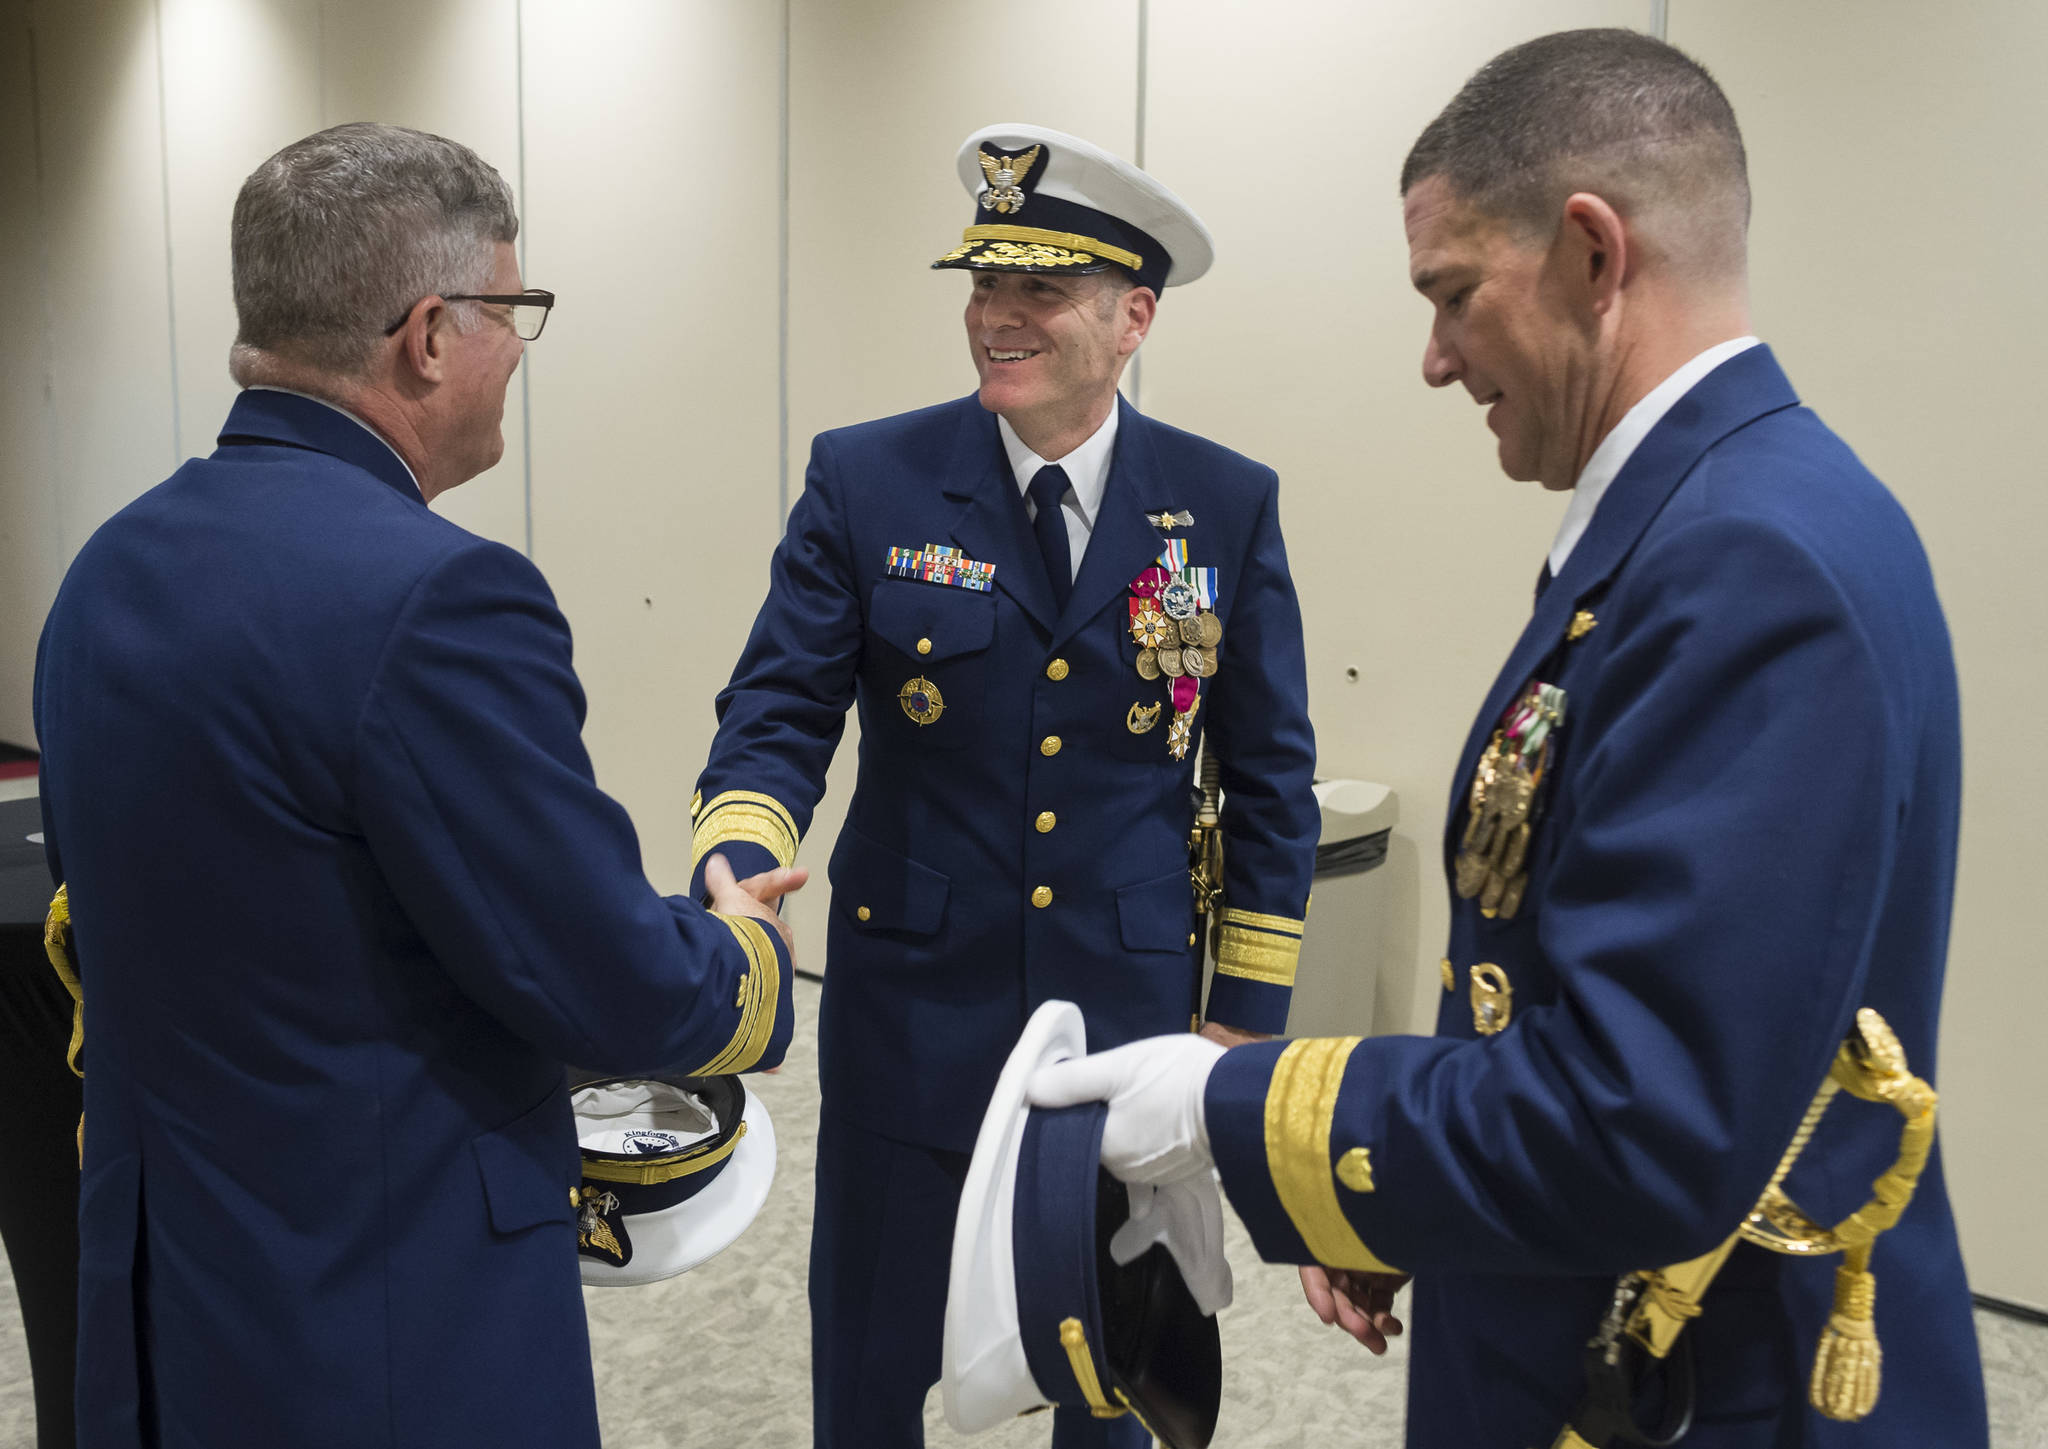 Vice Admiral Fred M. Midgette, Commander of Pacific Area and Coast Guard Defense Force West, left, Rear Admiral Michael F. McAllister, outgoing Commander of the Coast Guard 17th District, center, and Rear Admiral Matthew T. Bell Jr., incoming Commander of the Coast Guard 17th District, shake hands after a Change of Command Ceremony for the U.S. Coast Guard 17th District at the Elizabeth Peratrovich Hall on Wednesday, May 9, 2018. (Michael Penn | Juneau Empire)